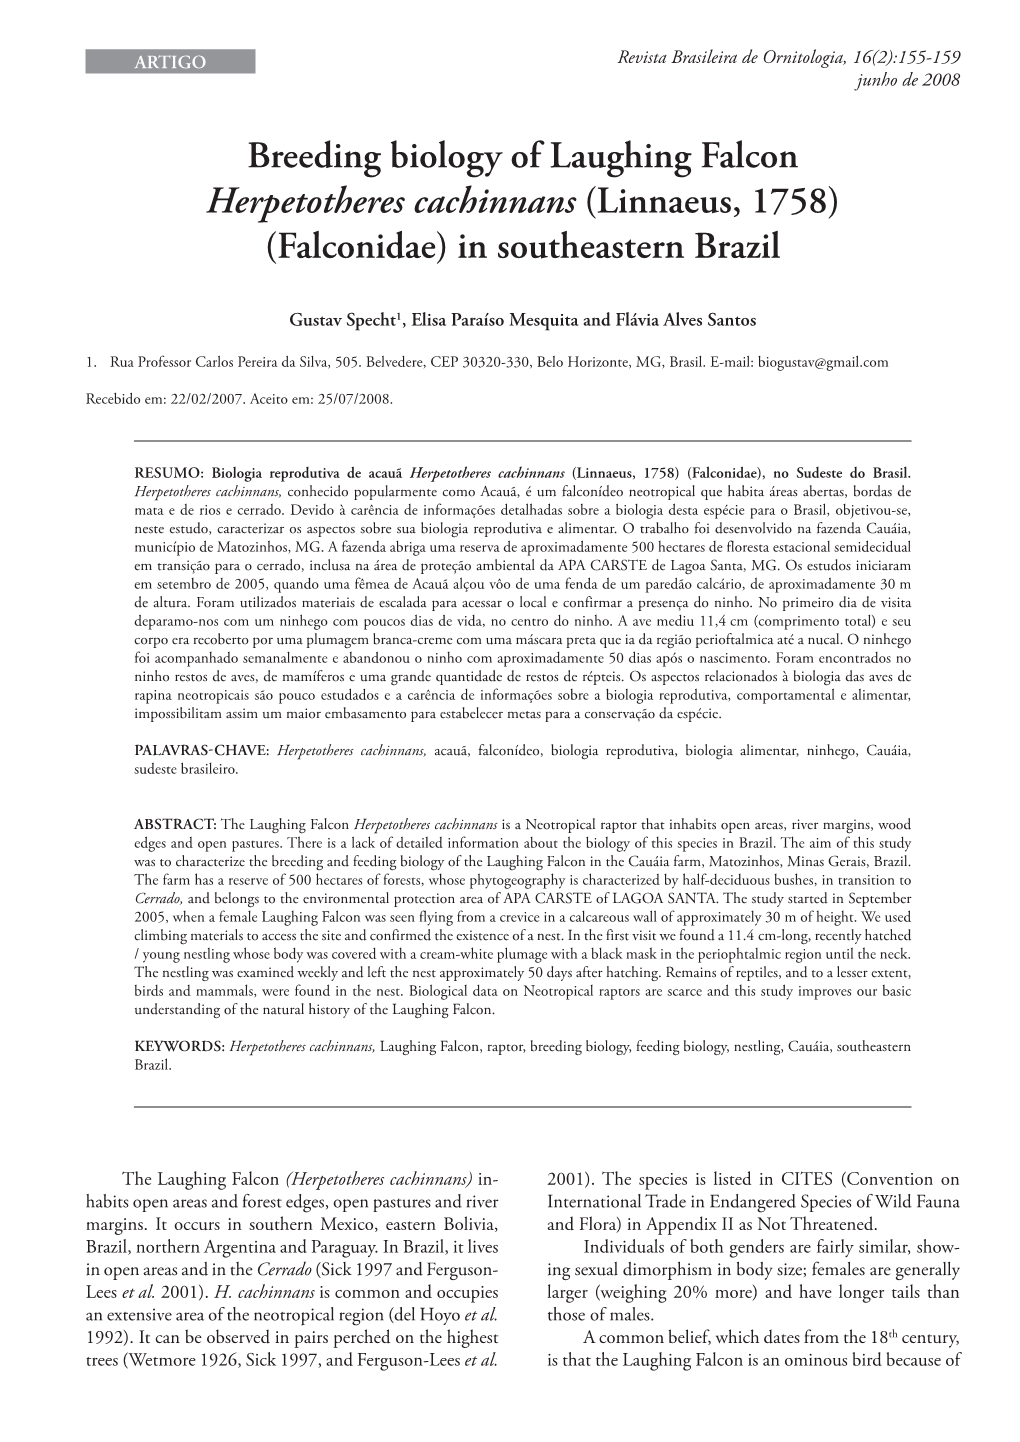 Breeding Biology of Laughing Falcon Herpetotheres Cachinnans (Linnaeus, 1758) (Falconidae) in Southeastern Brazil